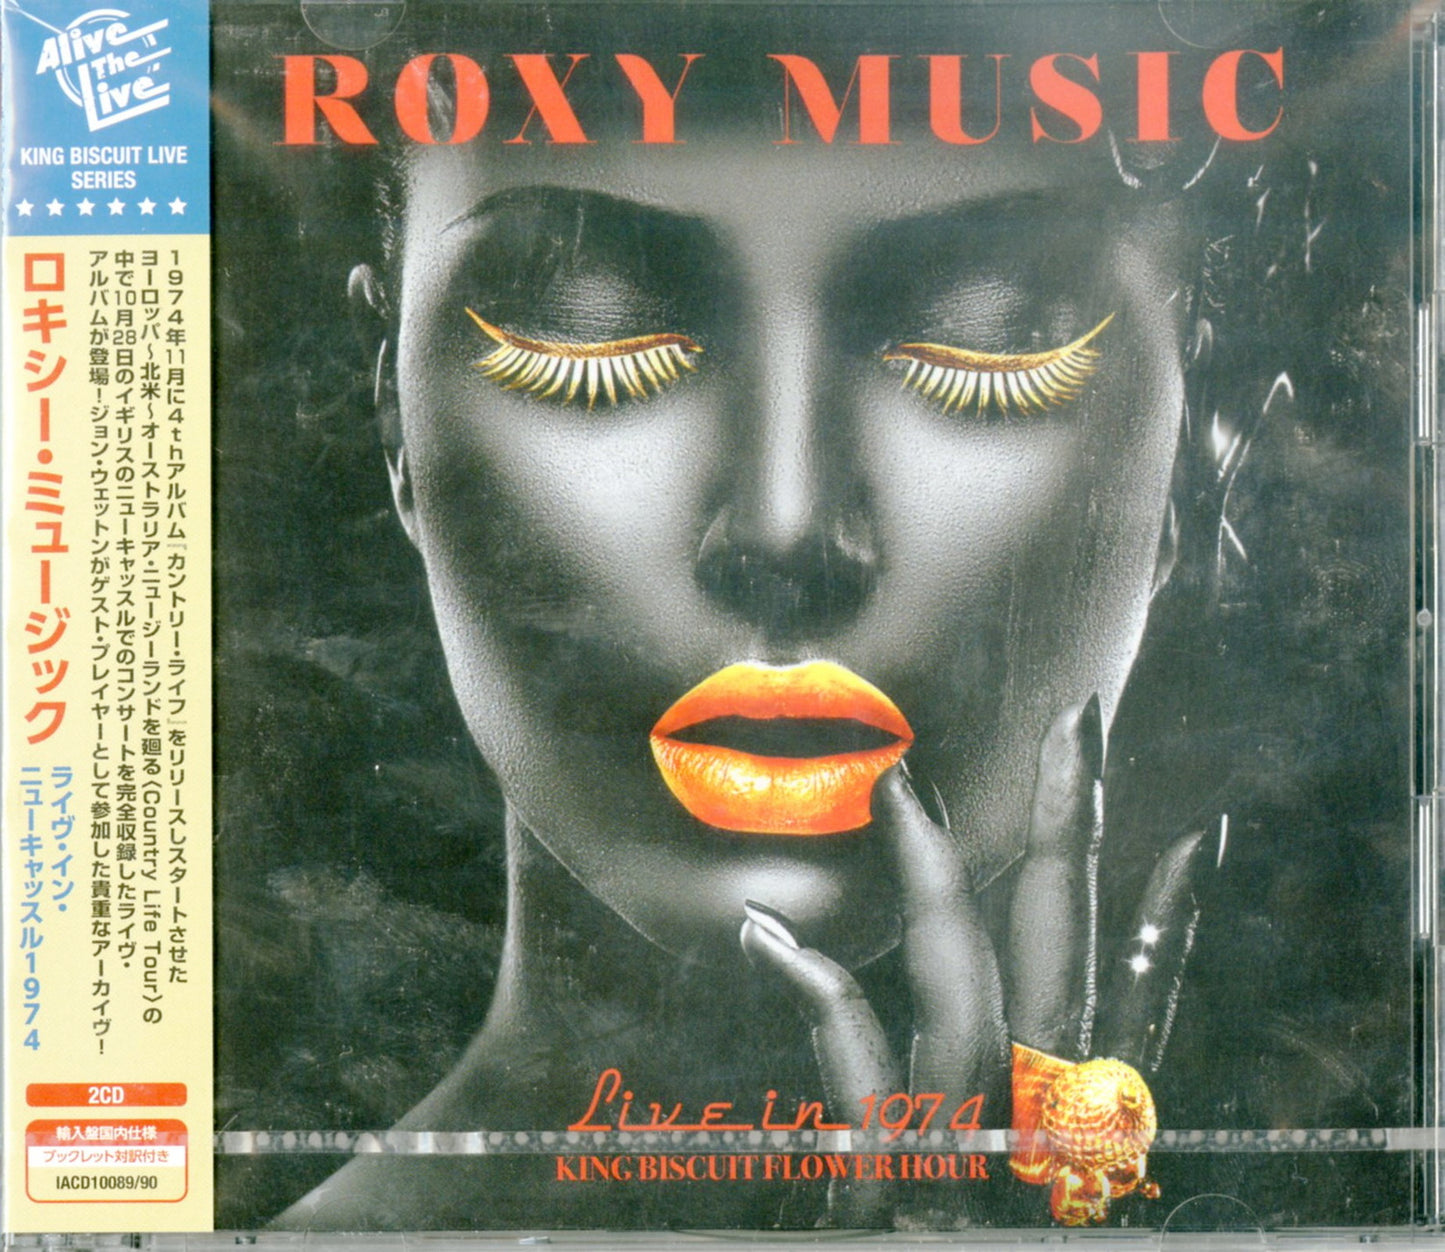 Roxy Music - Live In 1974 King Biscuit Flower Hour - Import 2 CD